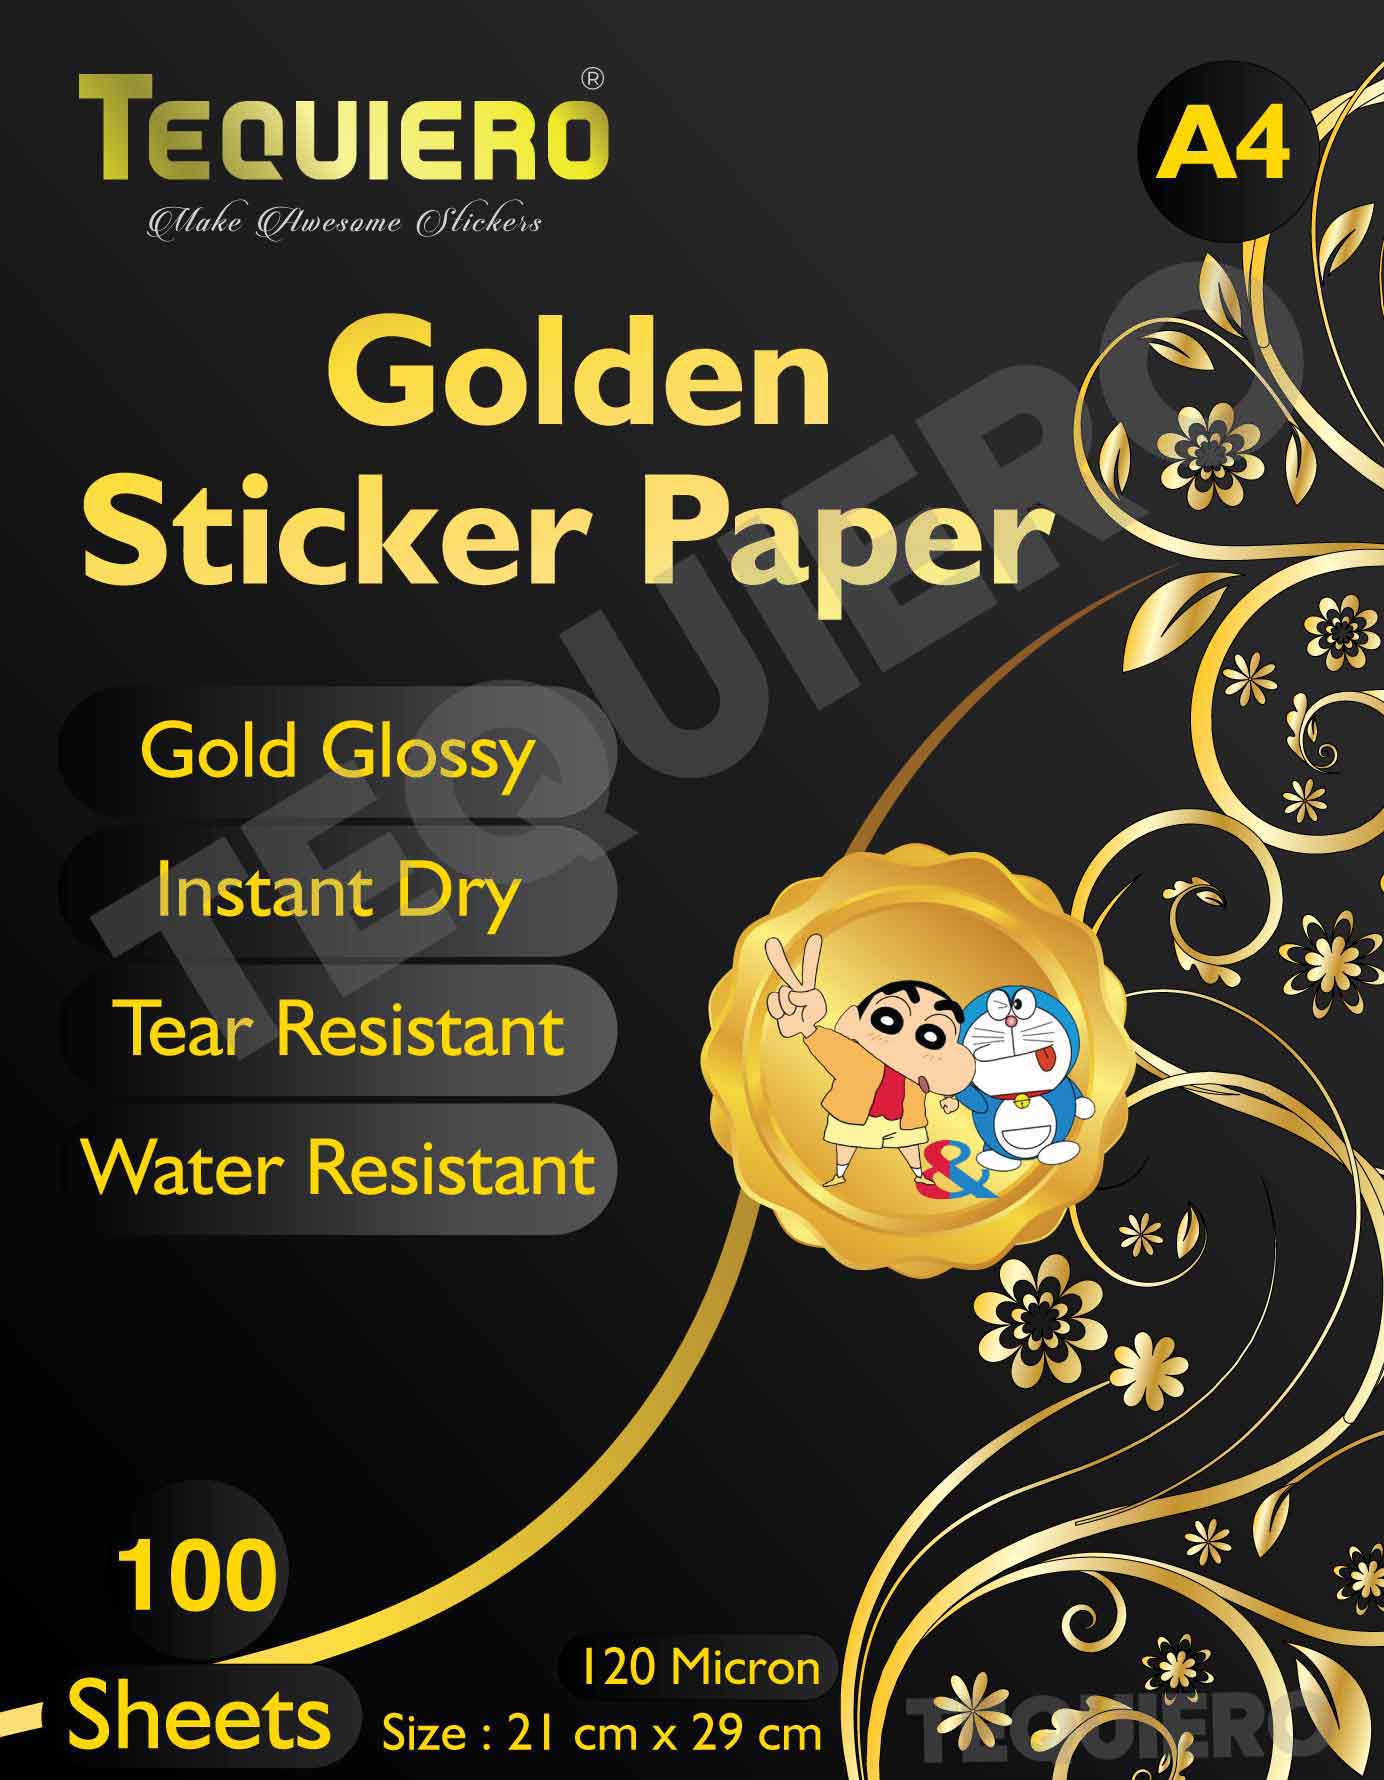 Golden Sticker Paper Printable A4 size for Inkjet and Laser Printers-100 Sheets Pack